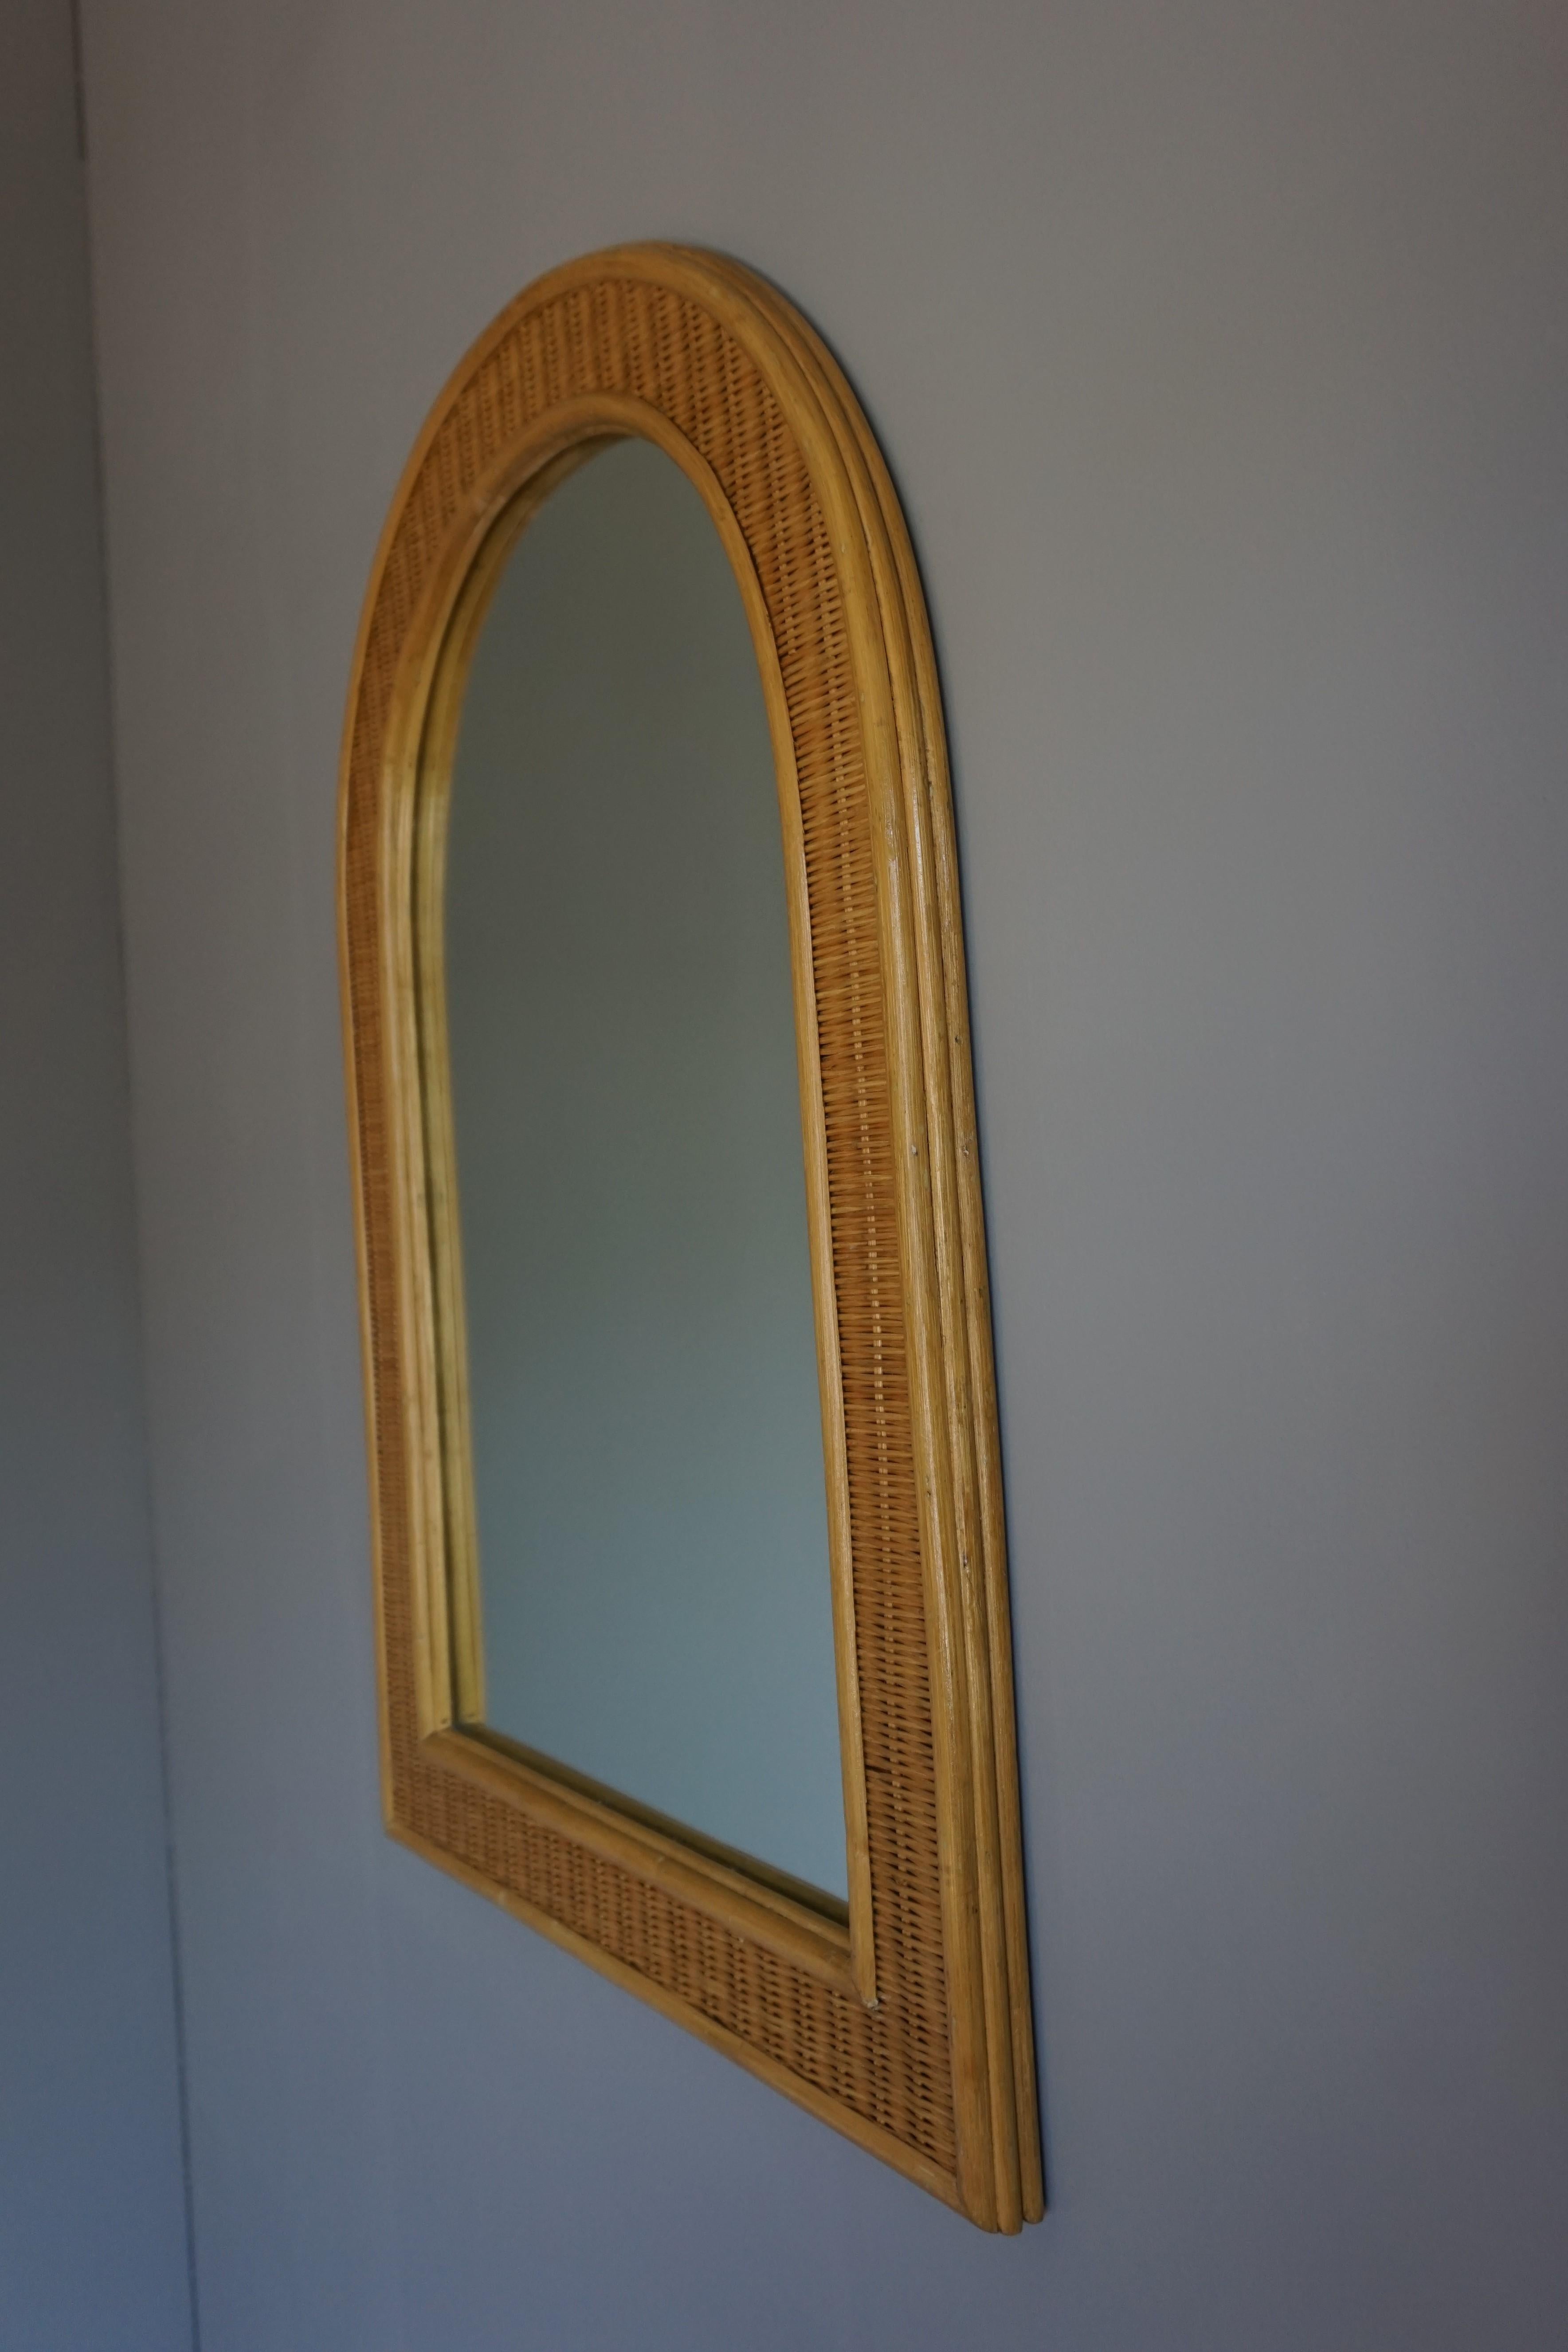 Rare and Handcrafted Midcentury Organic Rattan and Wicker Frame Wall Mirror 1970 For Sale 5